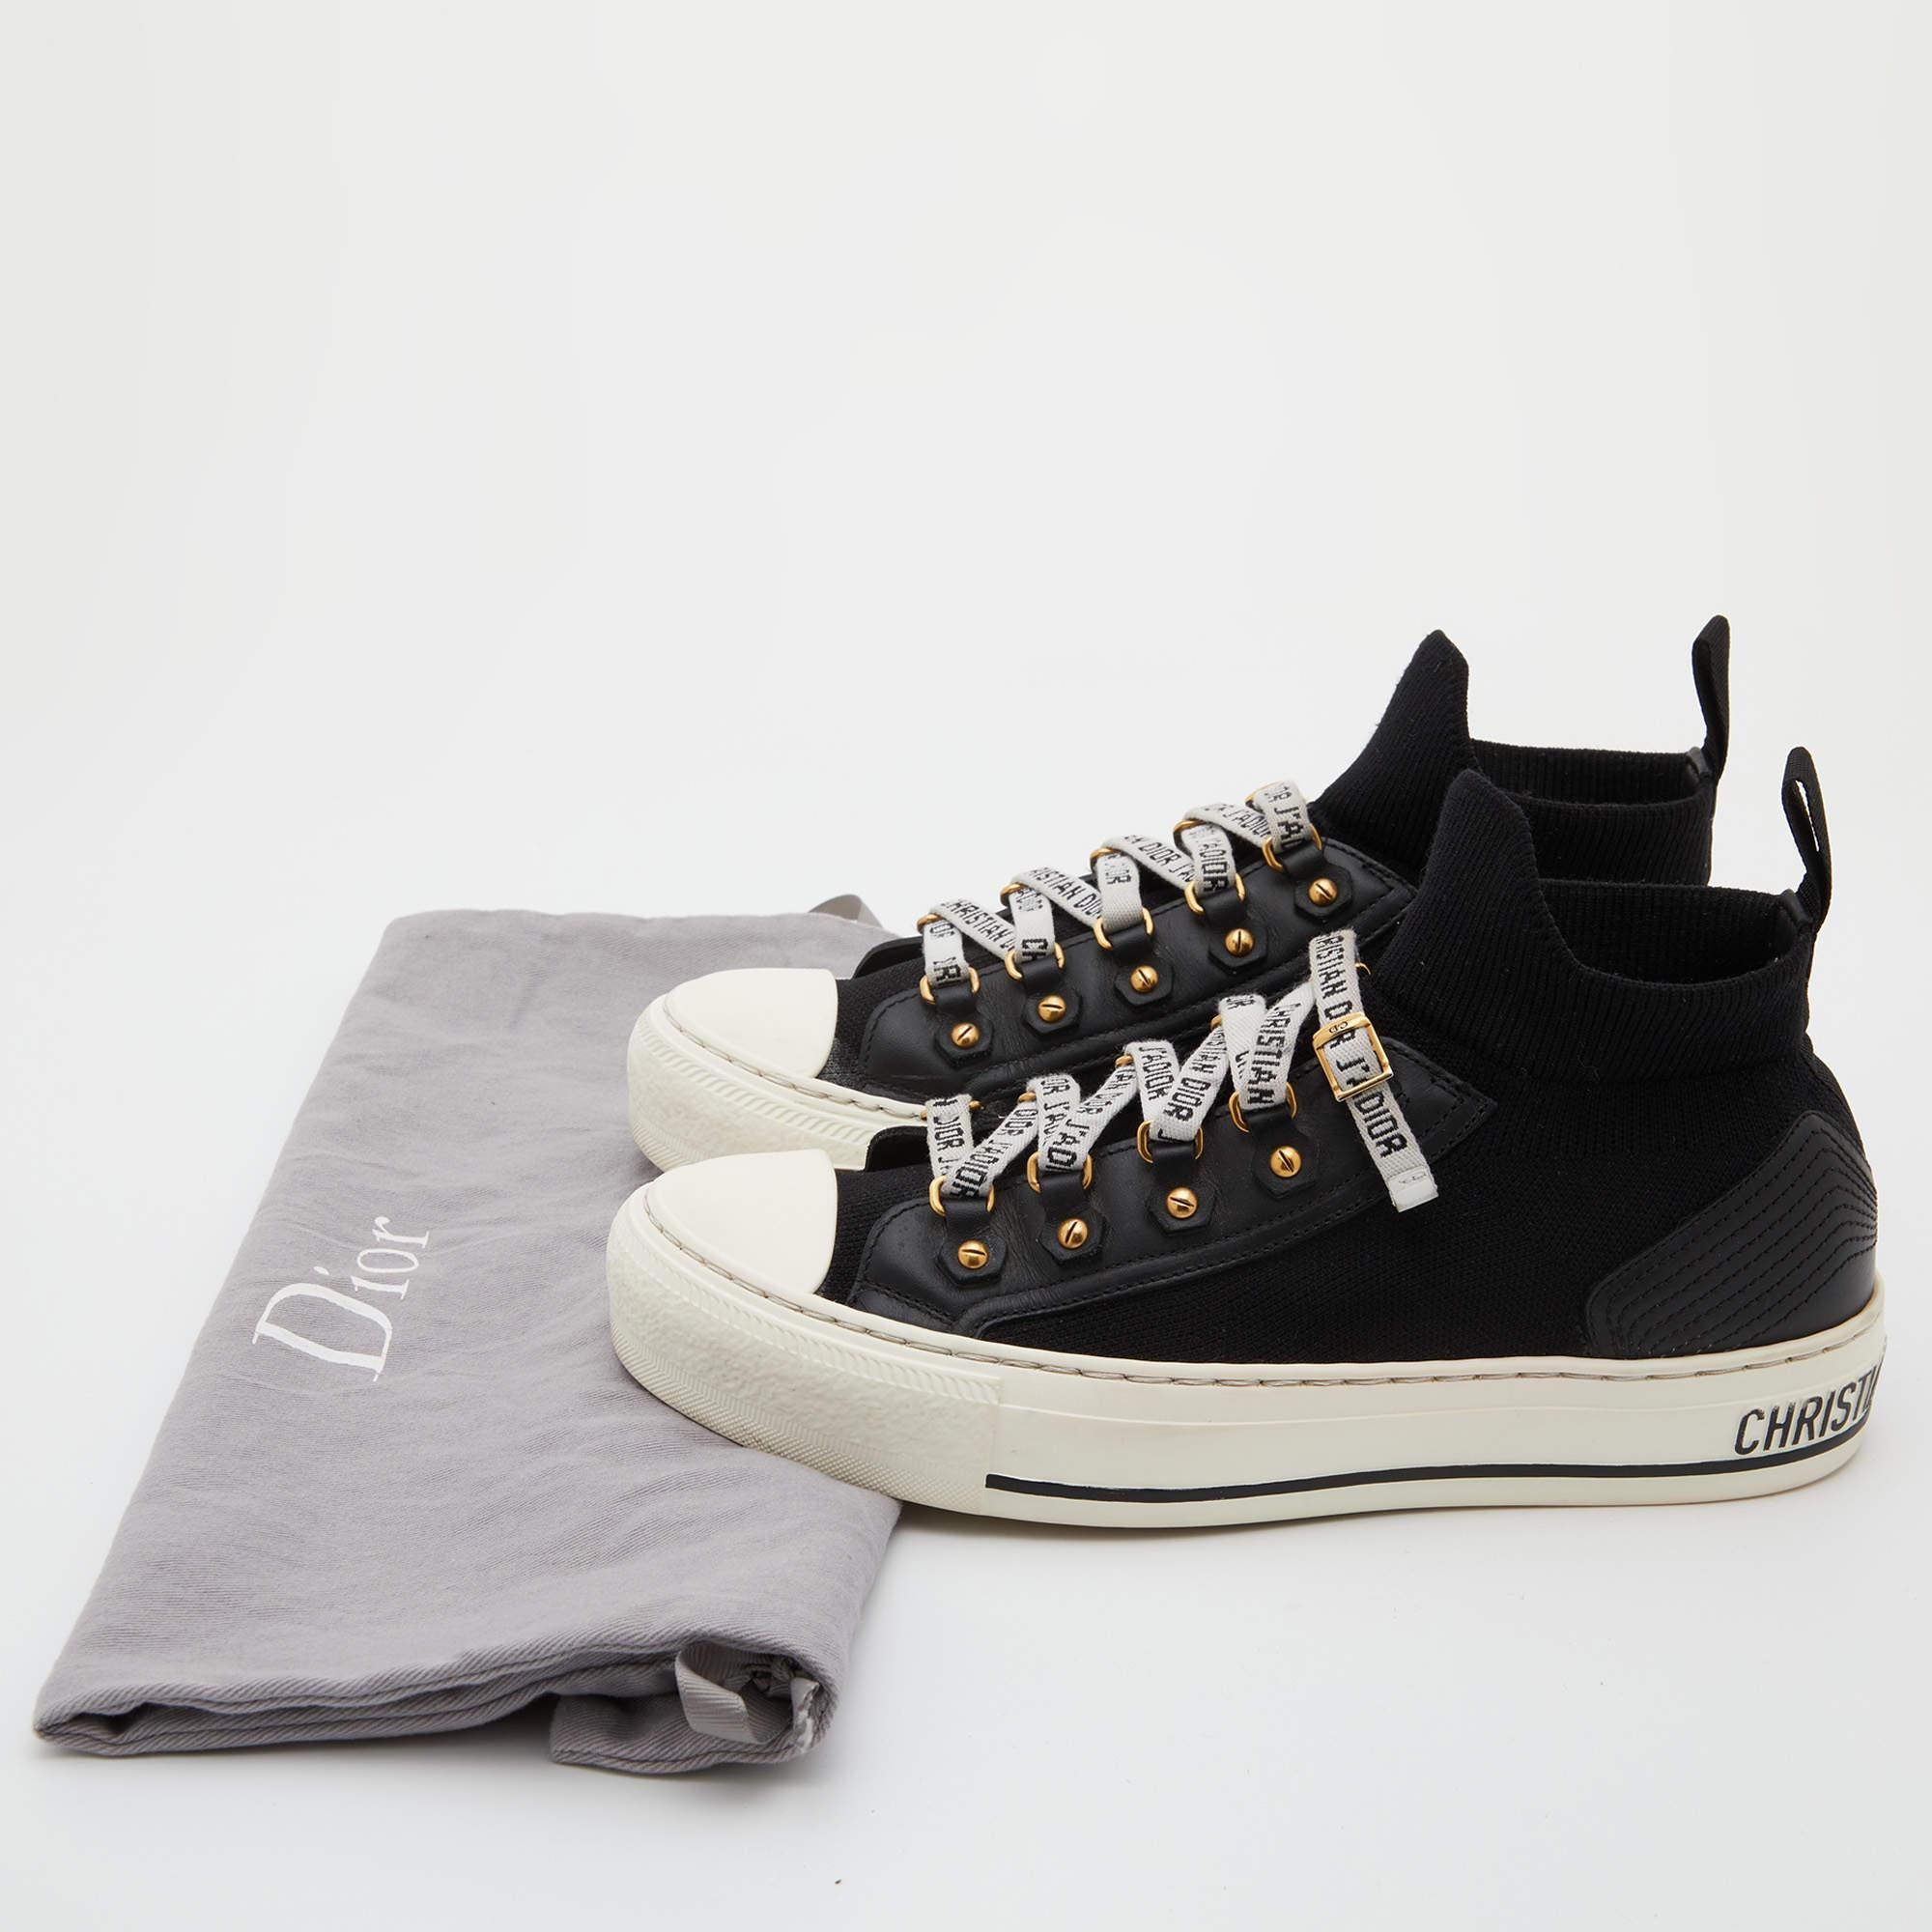 Dior Black/White Technical Knit and Leather Walk'n'Dior  Sneakers Size 36 5